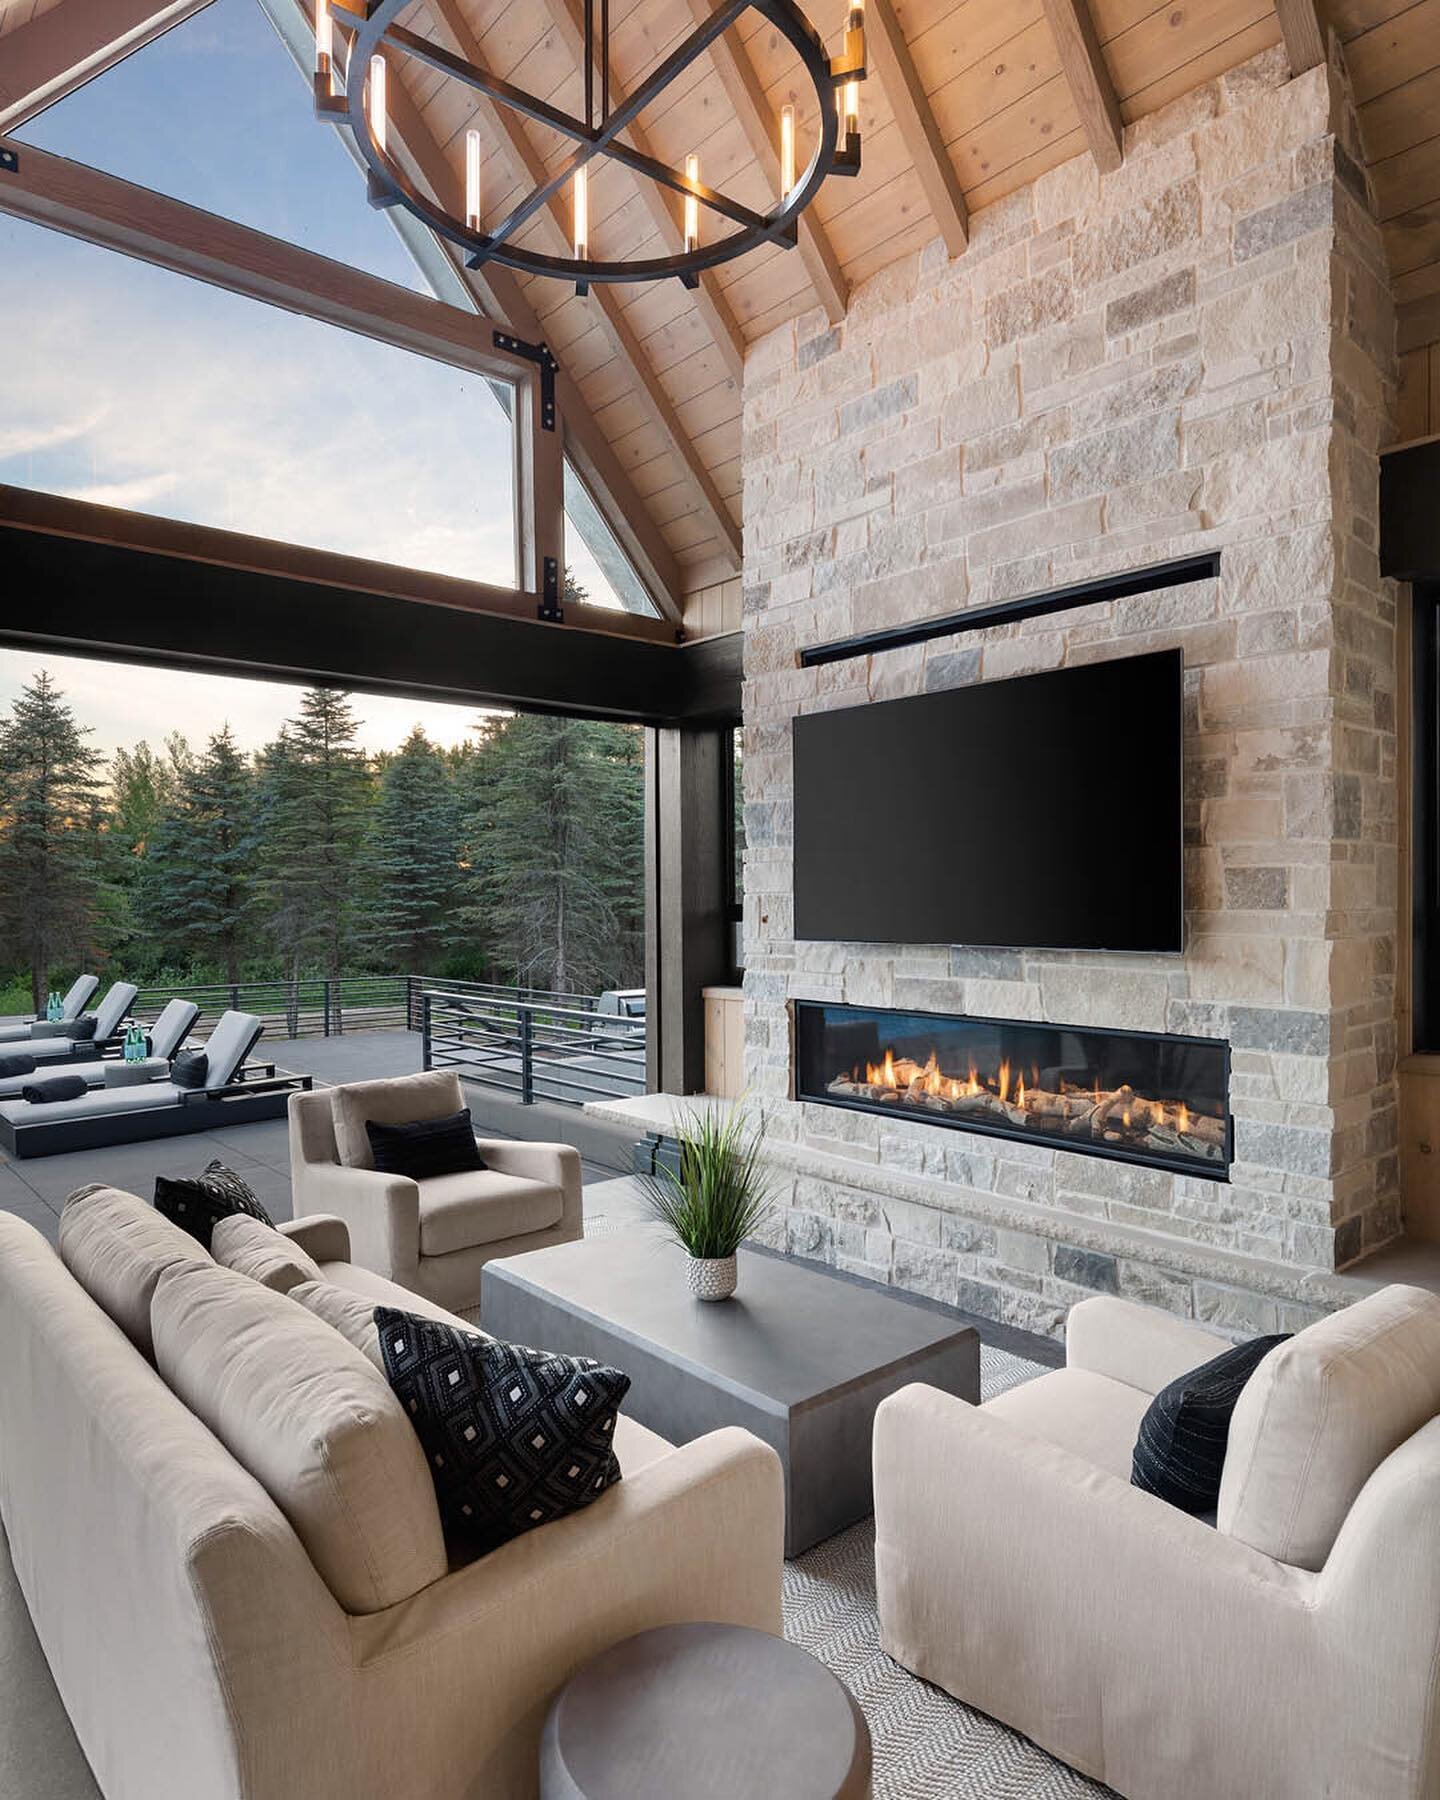 This indoor-outdoor space adapts perfectly to the unpredictable weather in spring, complete with a fireplace and retractable doors. Home by: @hartmanhomesinc 
#indooroutdoor #indooroutdoorliving #fireplacedesign #fireplaces #fireplacesurround #living